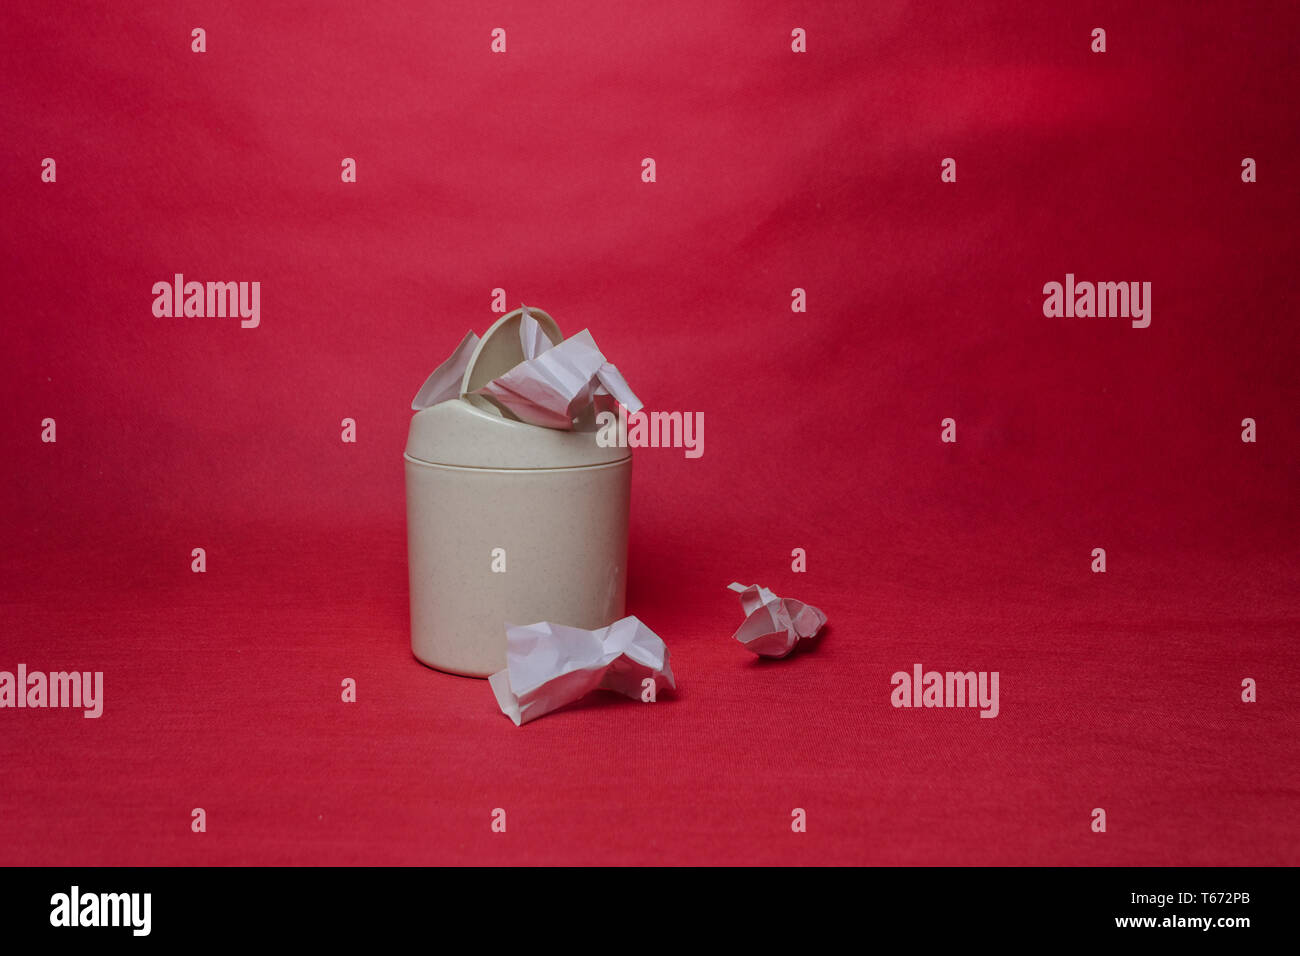 Light trash bin on a red background. Closeup of crumpled sheets of paper. The concept of environmental recycling of paper waste. Stock Photo